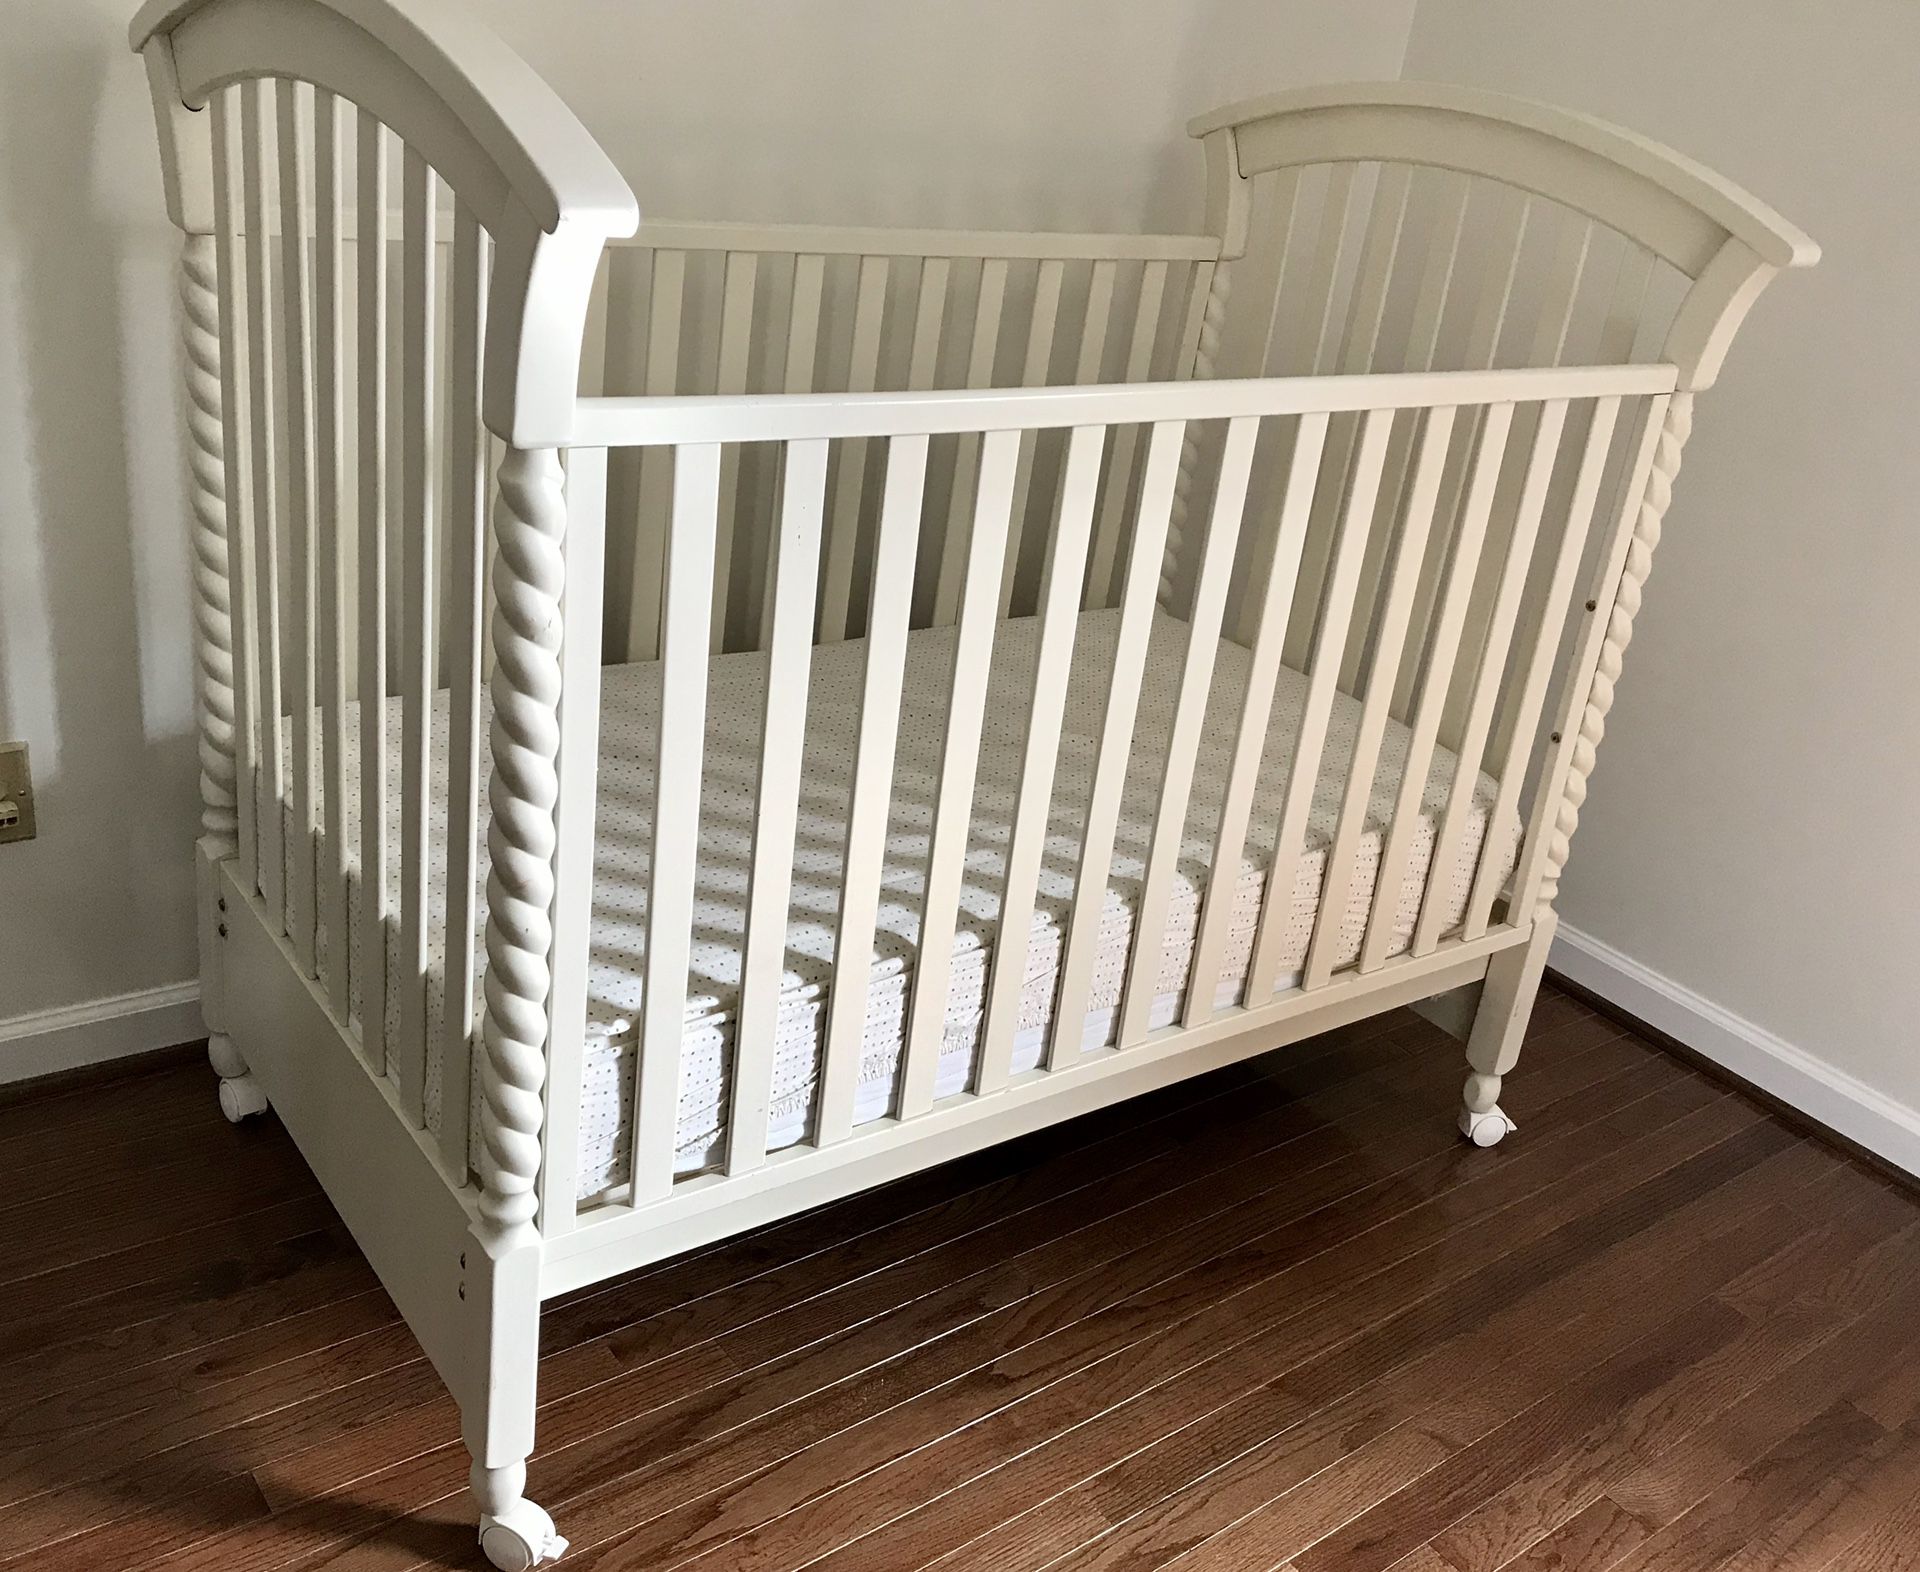 Excellent Baby Crib Mattress and Cover includ